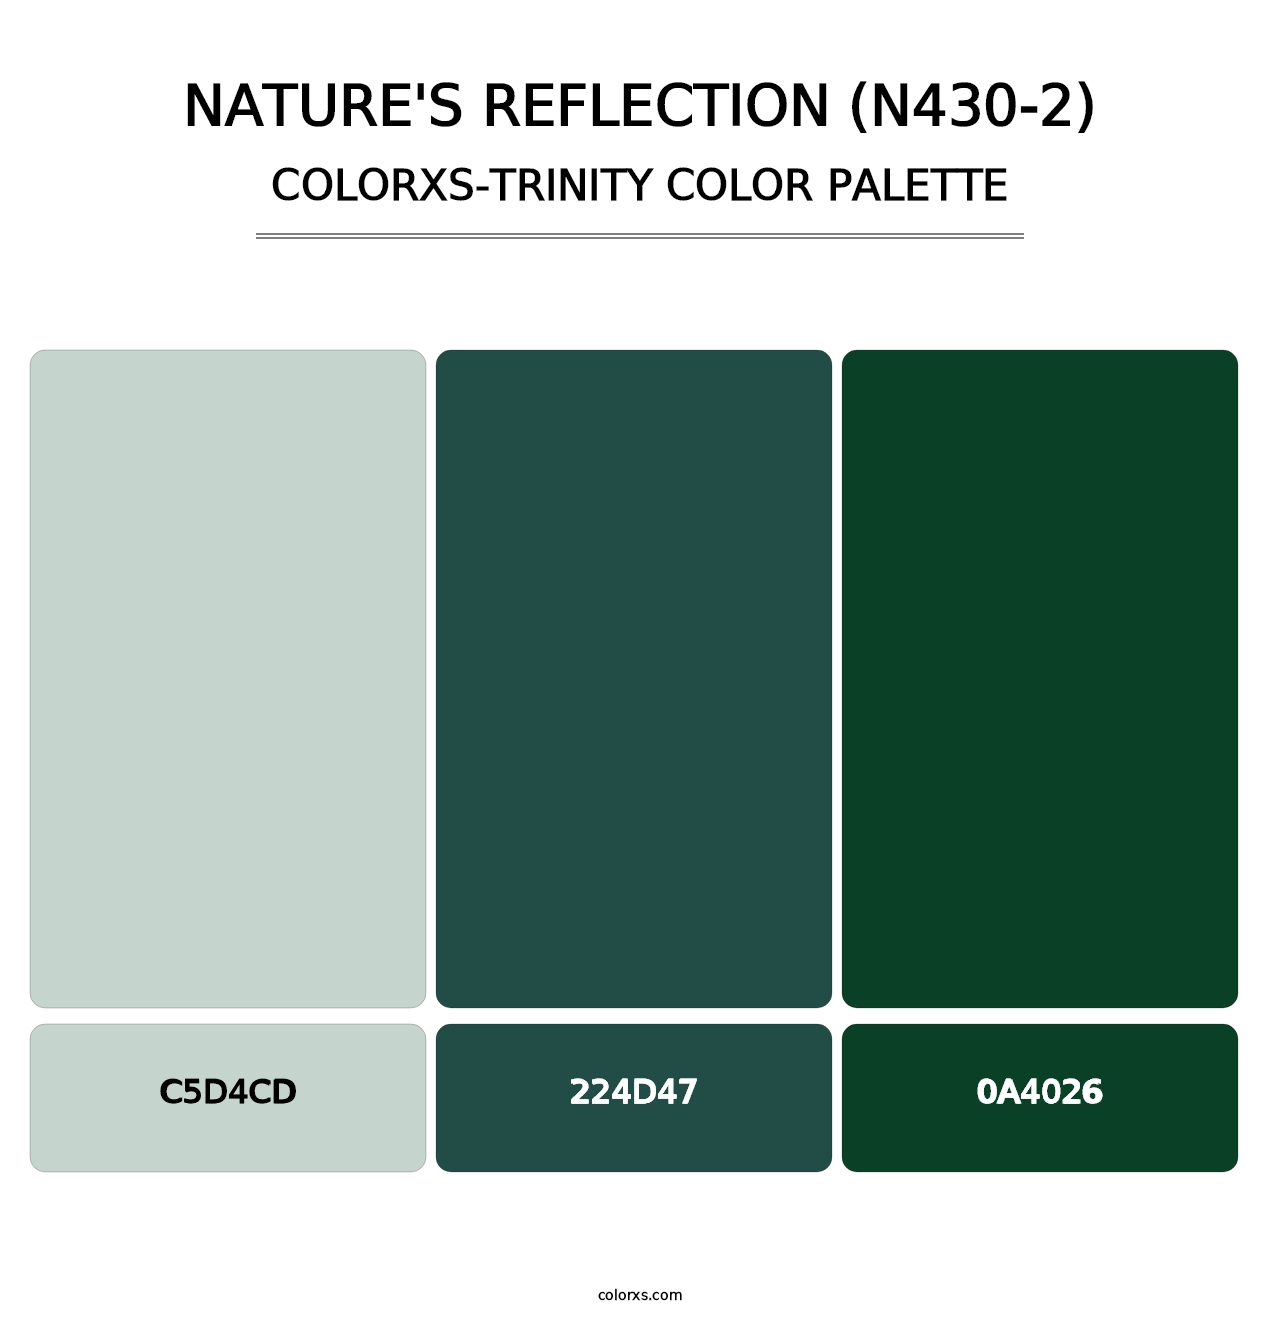 Nature'S Reflection (N430-2) - Colorxs Trinity Palette